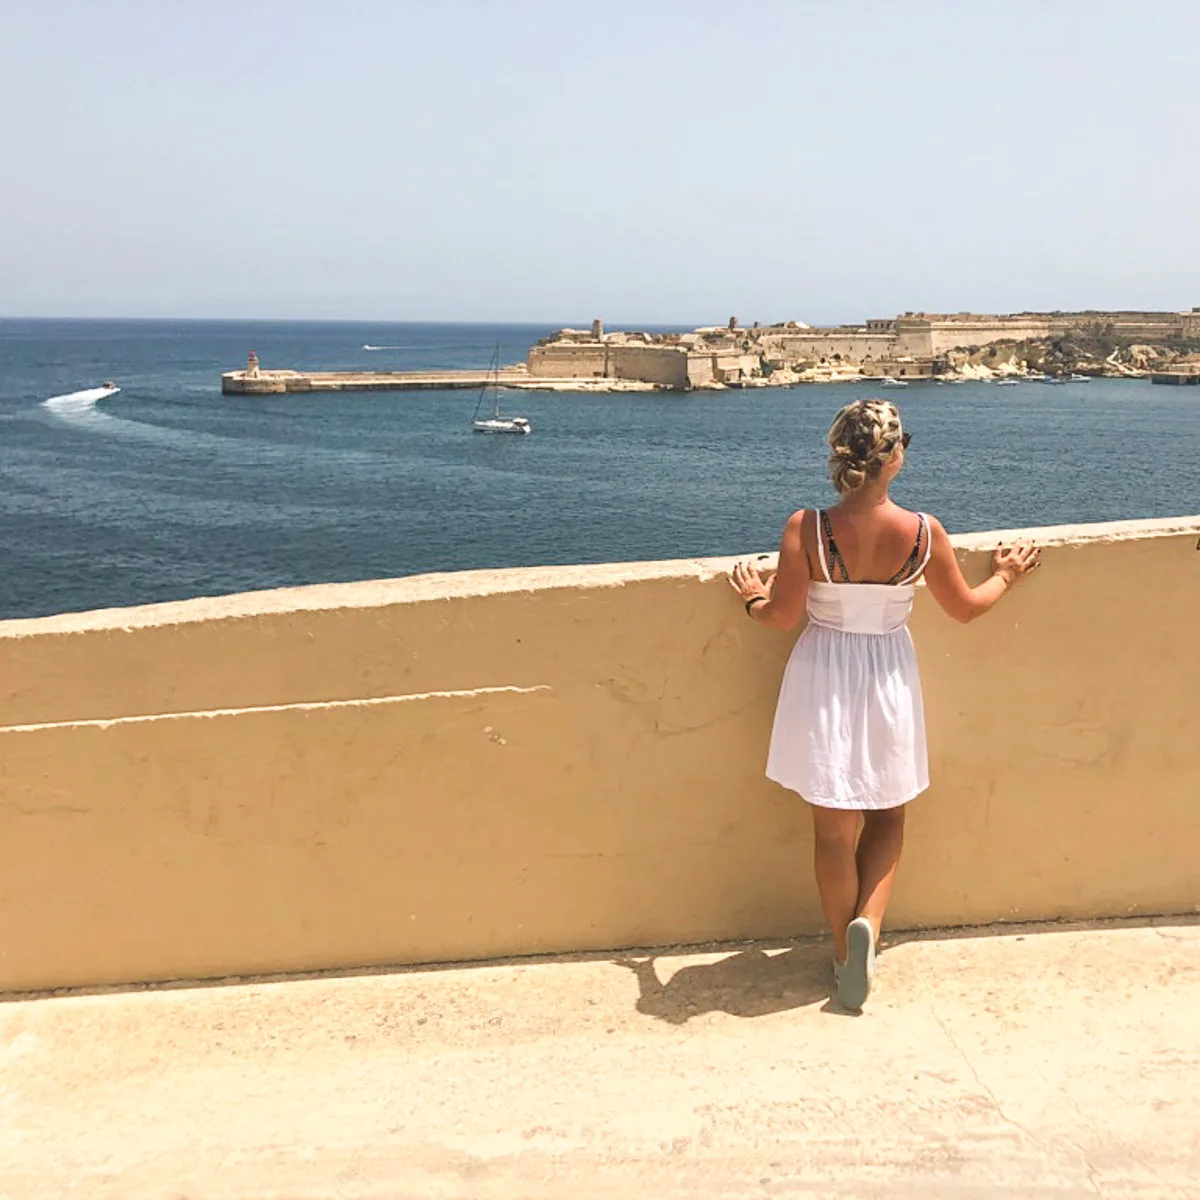 the author in malta standing on a platform overlooking the ocean